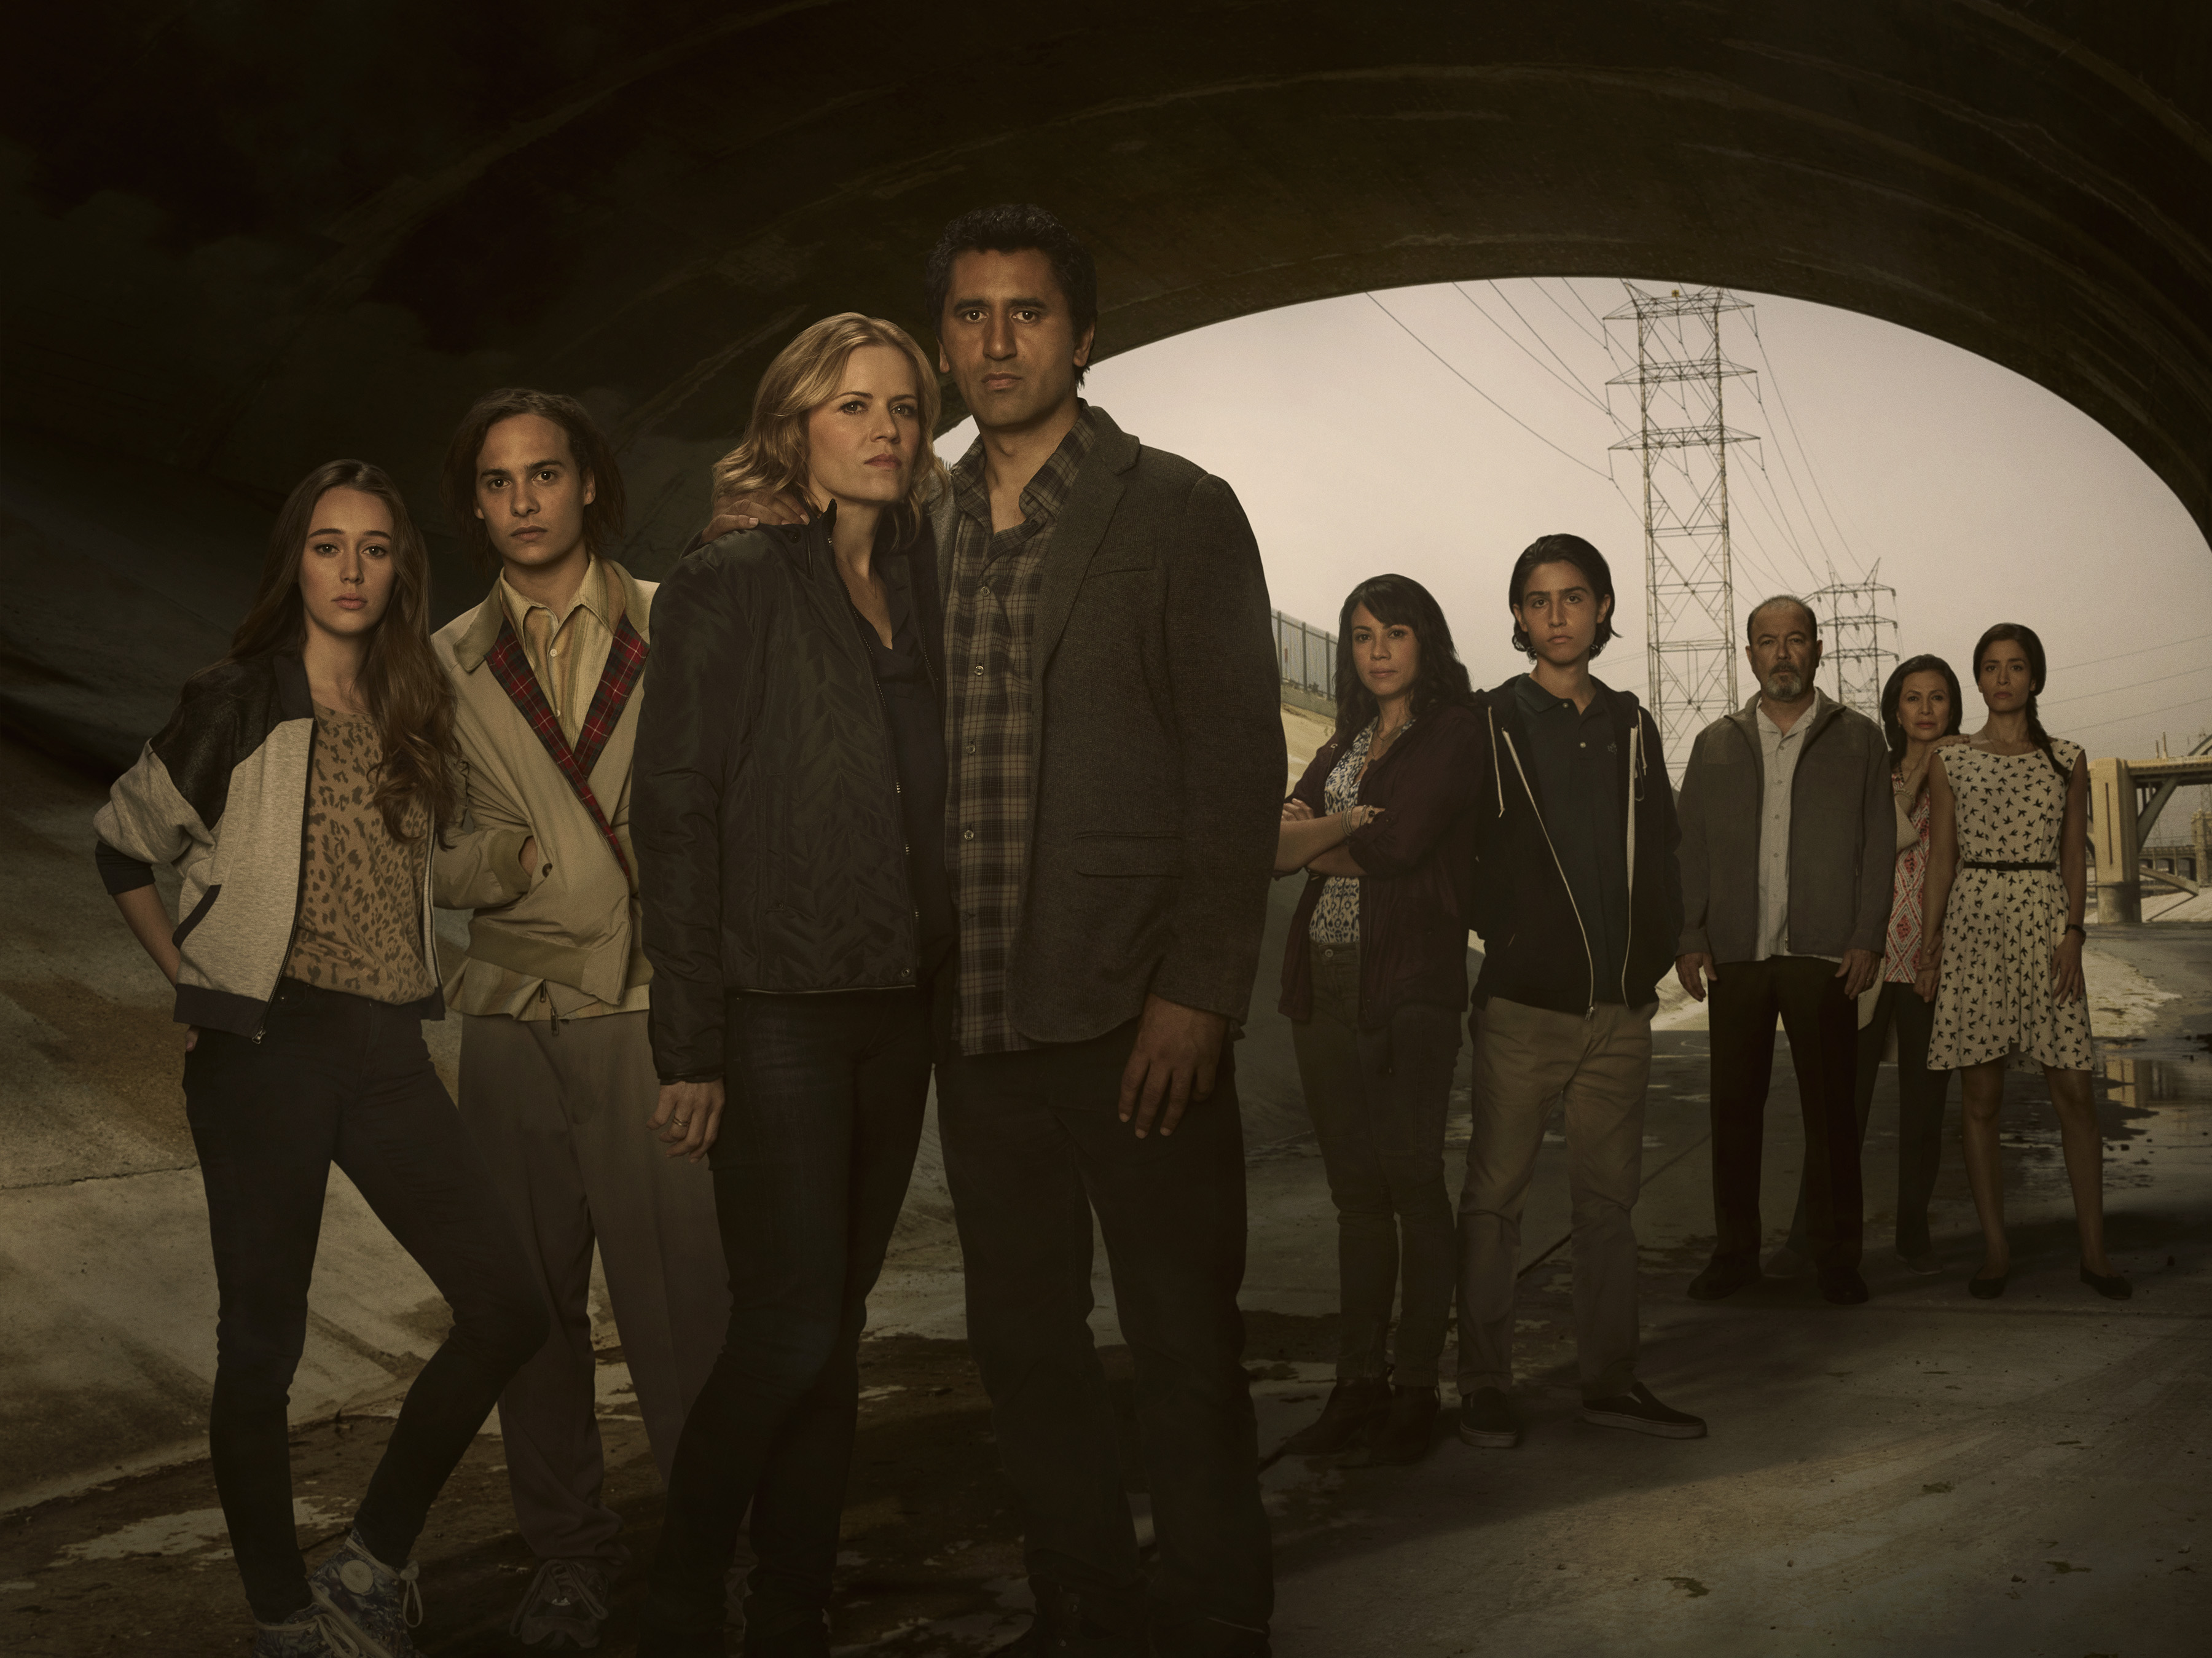 fear the walking dead preview: anything and every